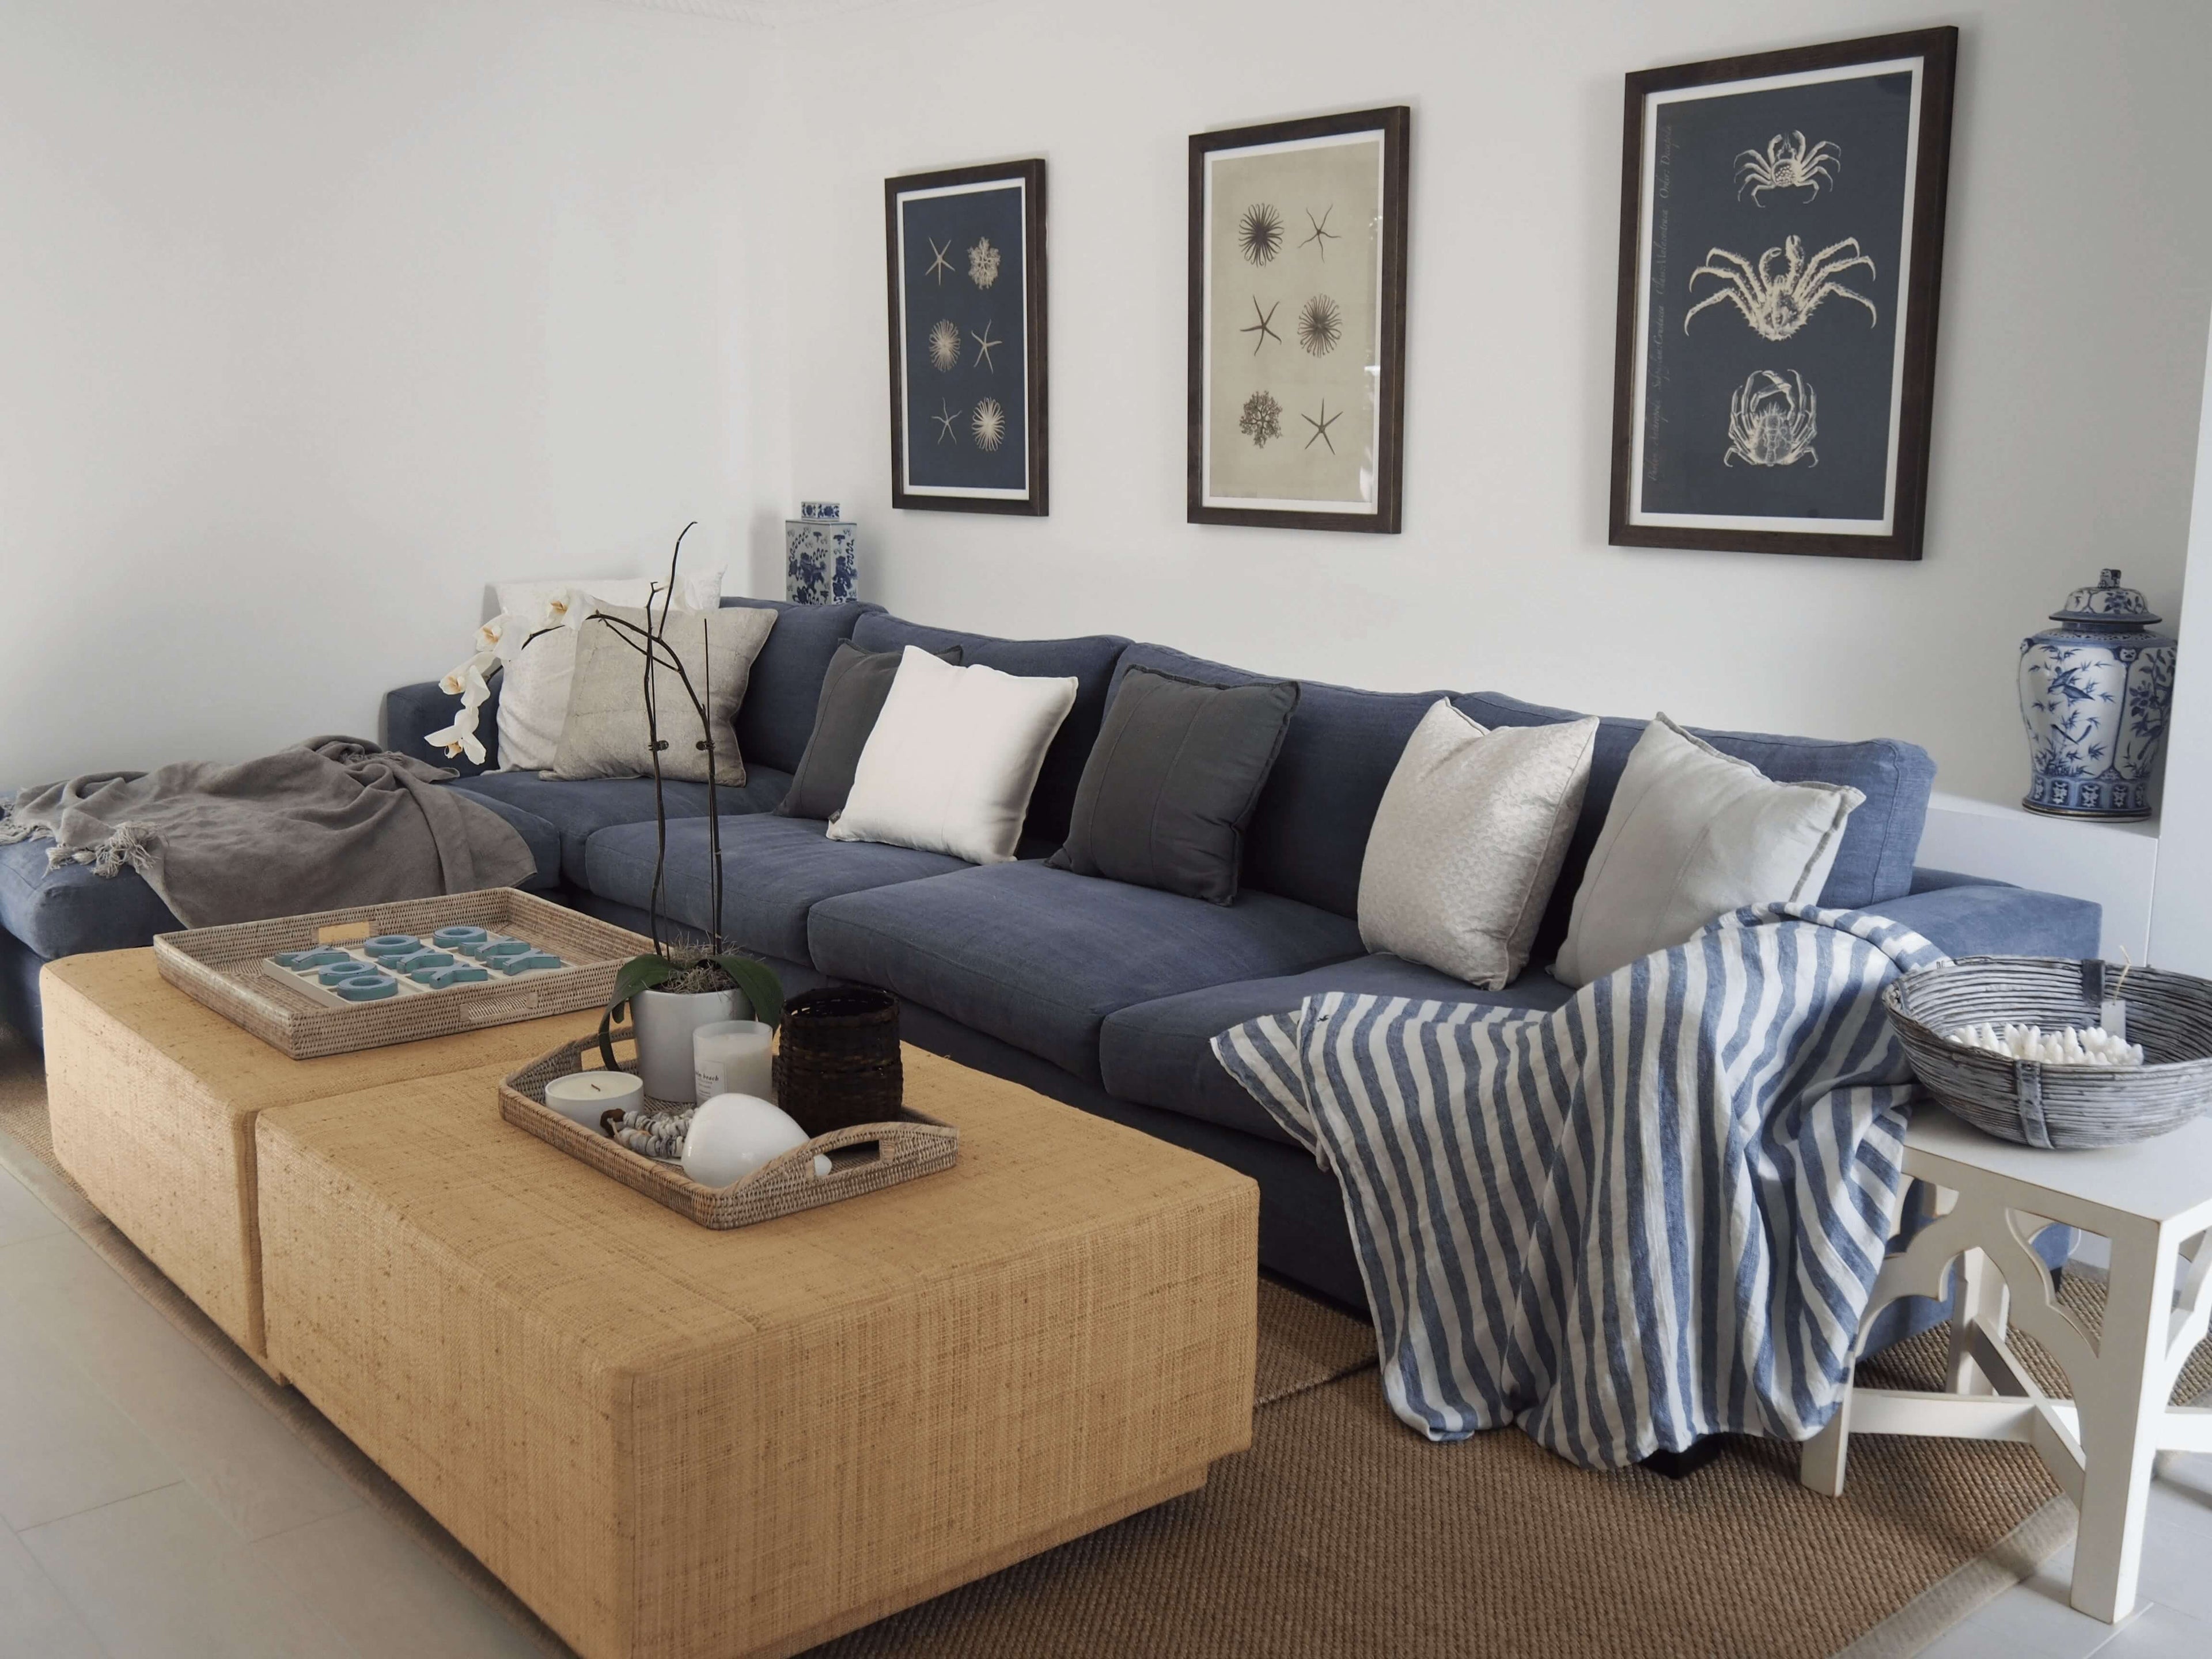 Cozy coastal living room with a custom long blue sofa adorned with white and grey pillows, a natural textured ottoman coffee table, nautical-inspired decor, and botanical framed art on the wall